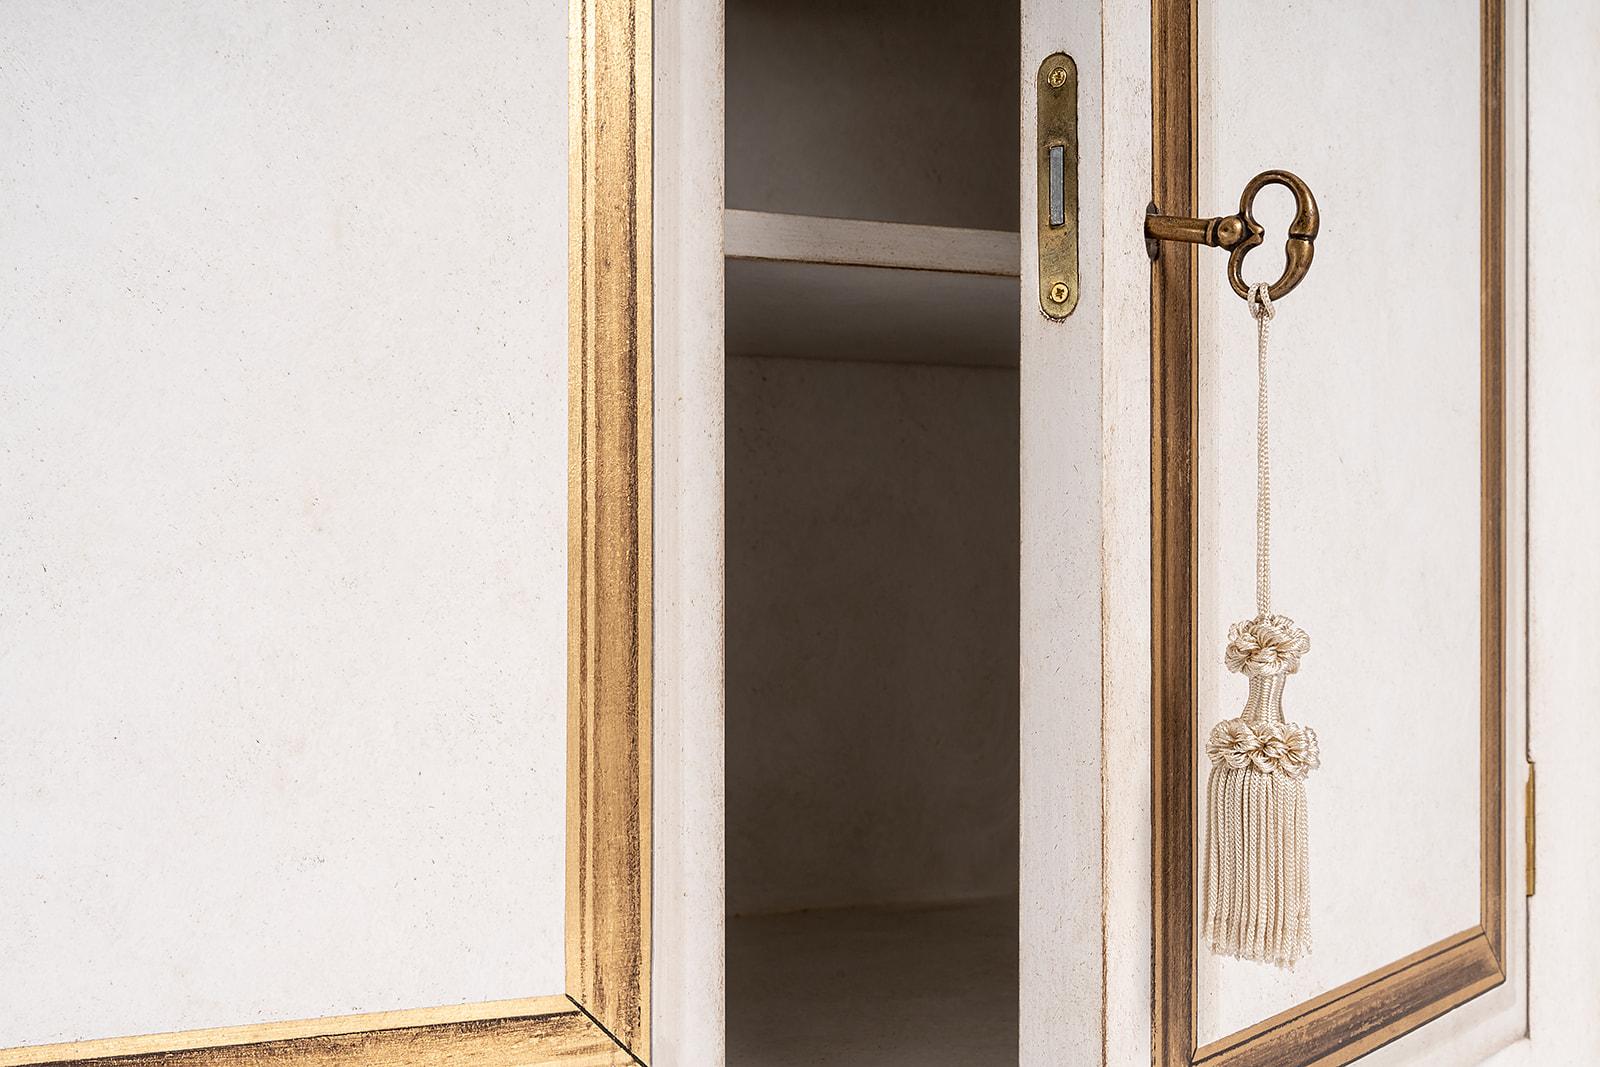 From our Hand-Painted Furniture Collection, we are pleased to introduce you to our Barberini Cabinet with Internal Shelf.
This beautiful piece is completed in Chalky White with trompe l'oeil decors in gold-leaf on each cabinet door - contemporary